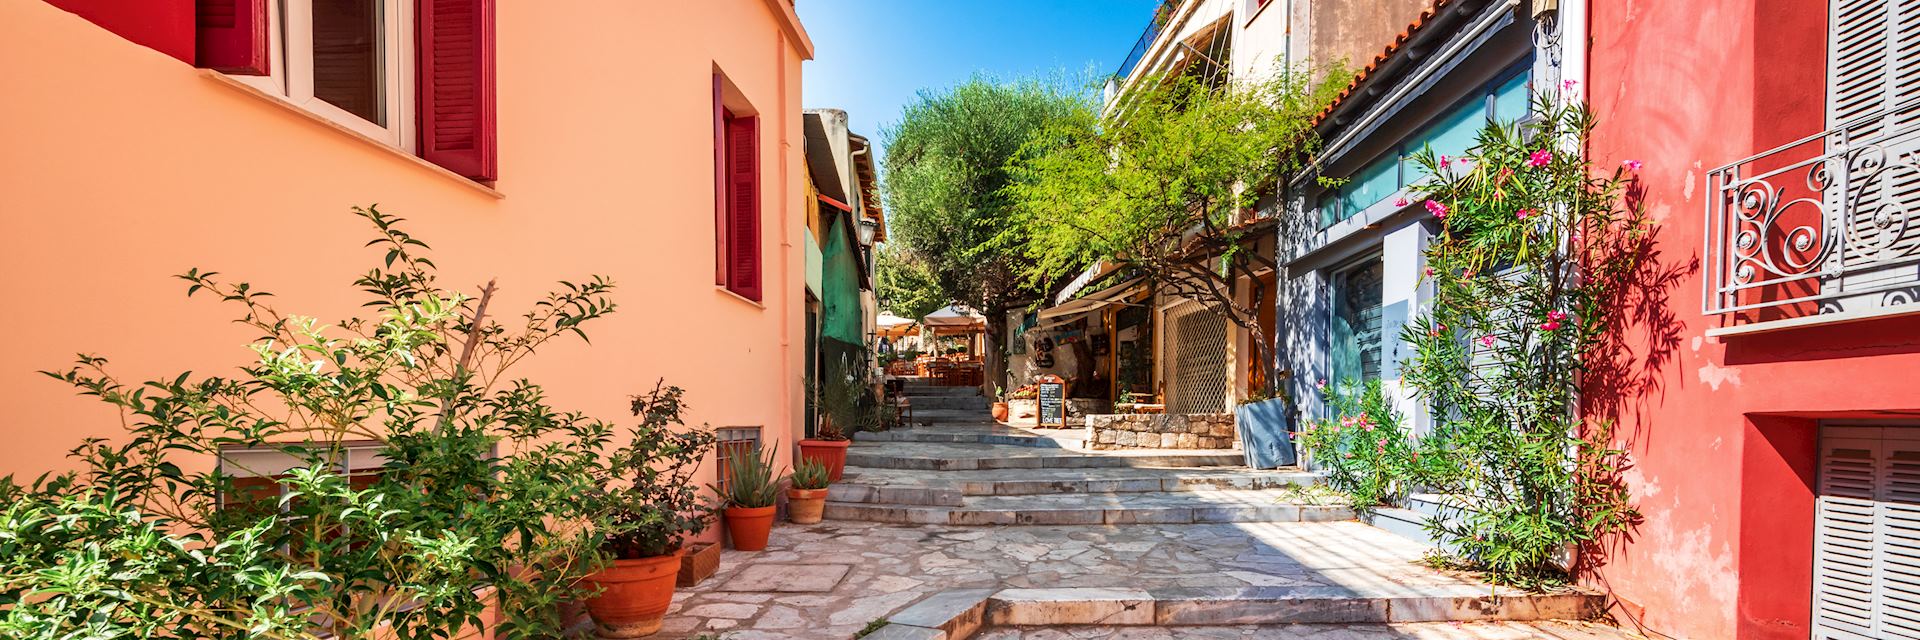 Old street in the Plaka district, Athens